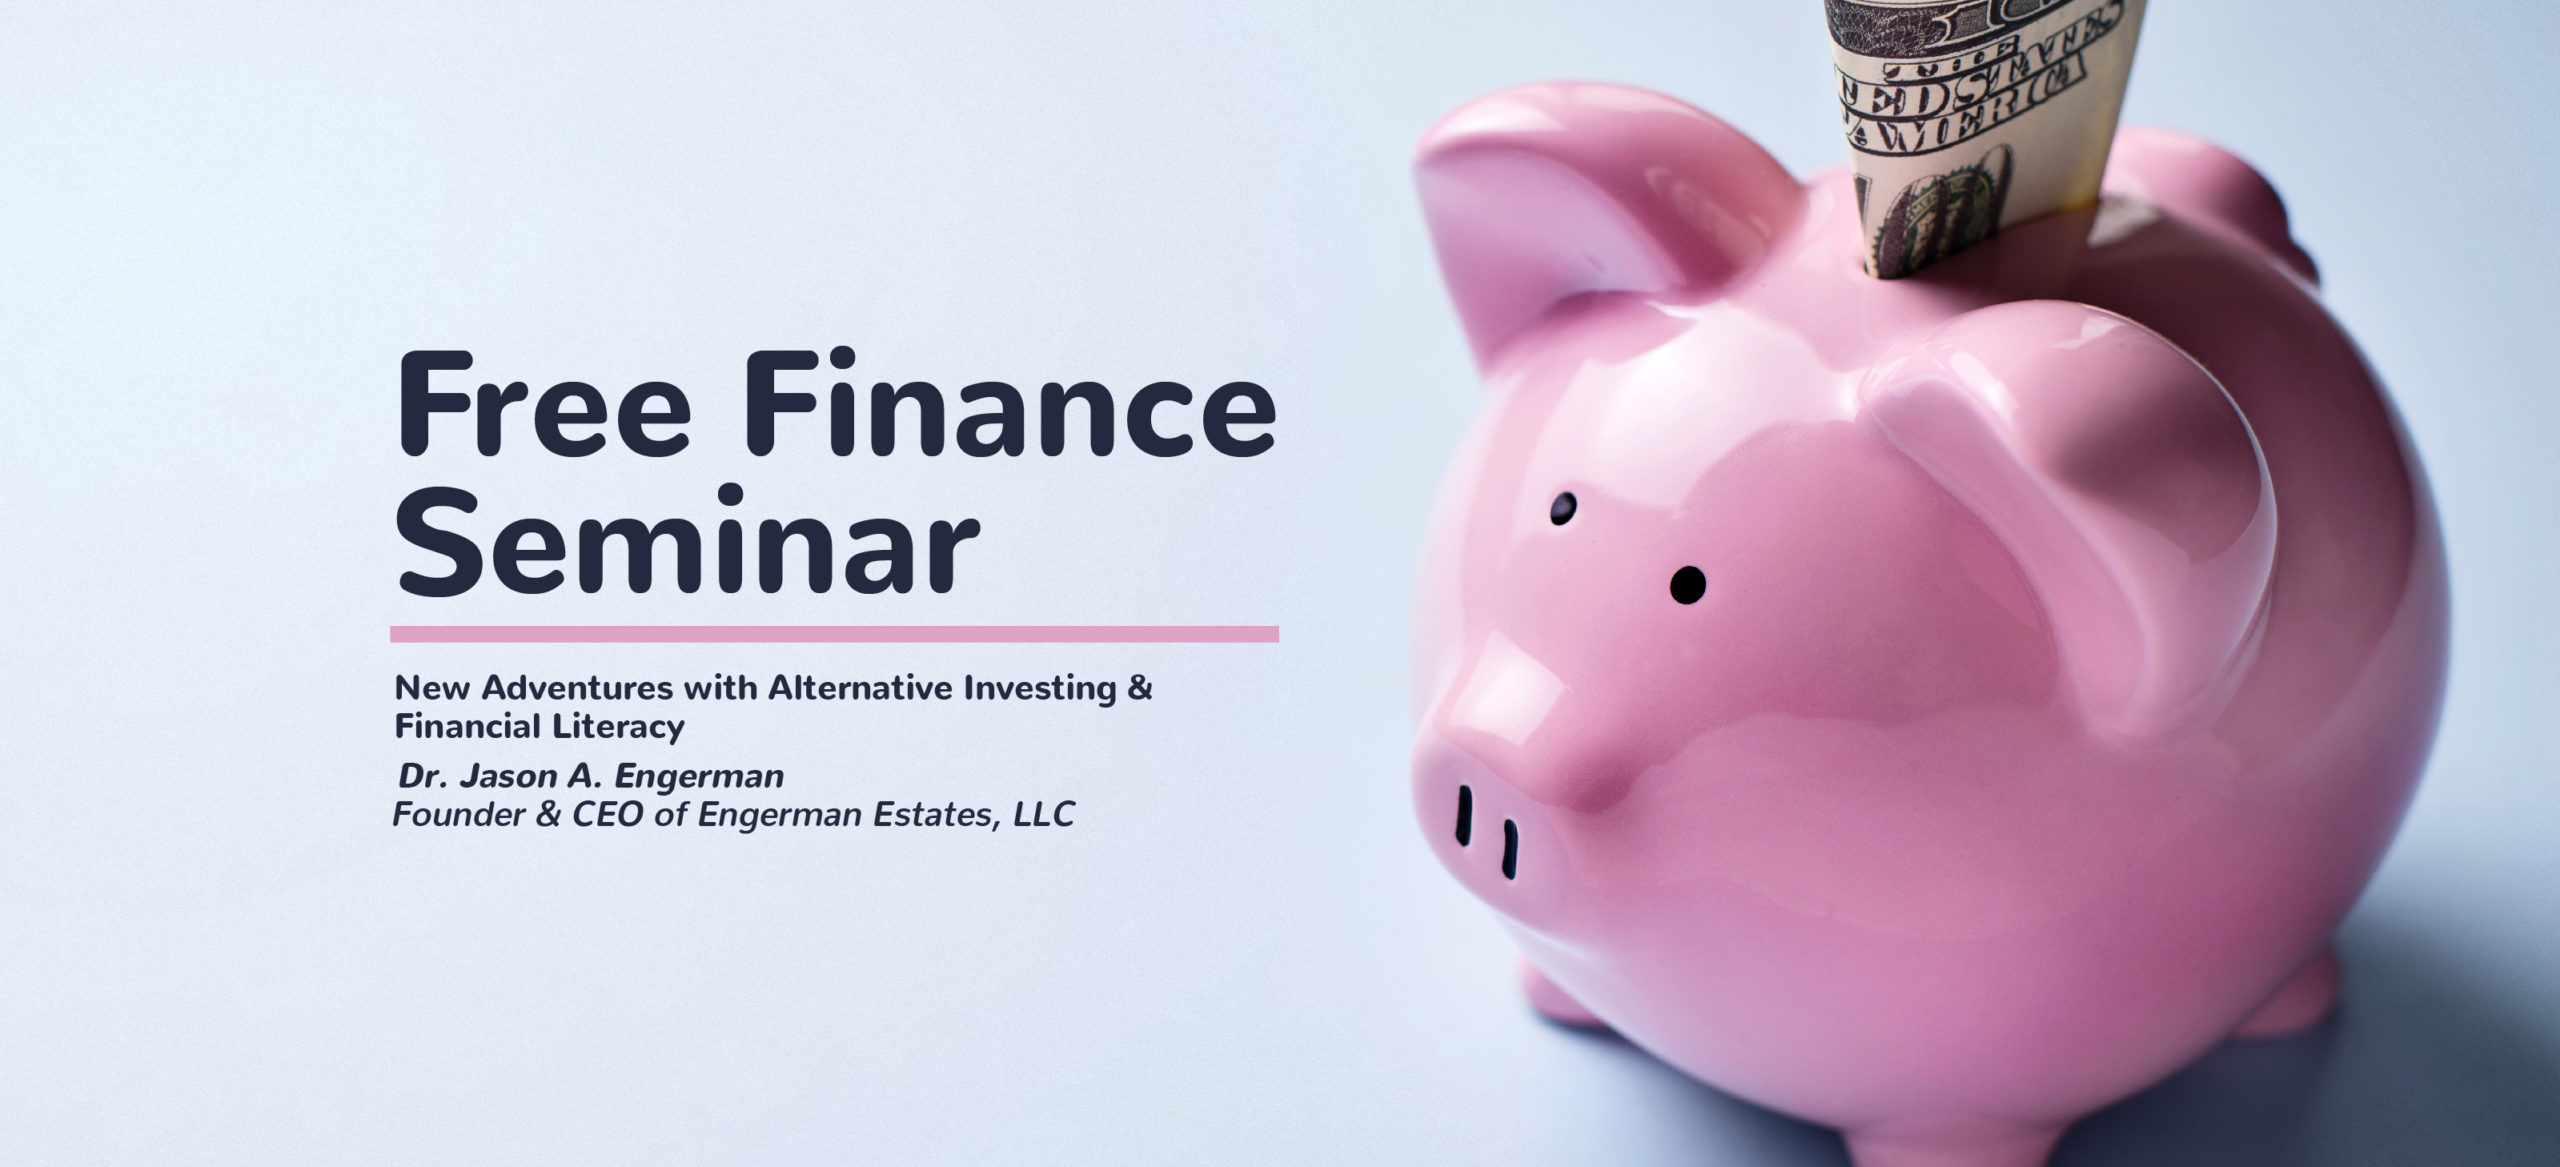 New Adventures with Alternative Investing & Financial Literacy Seminar